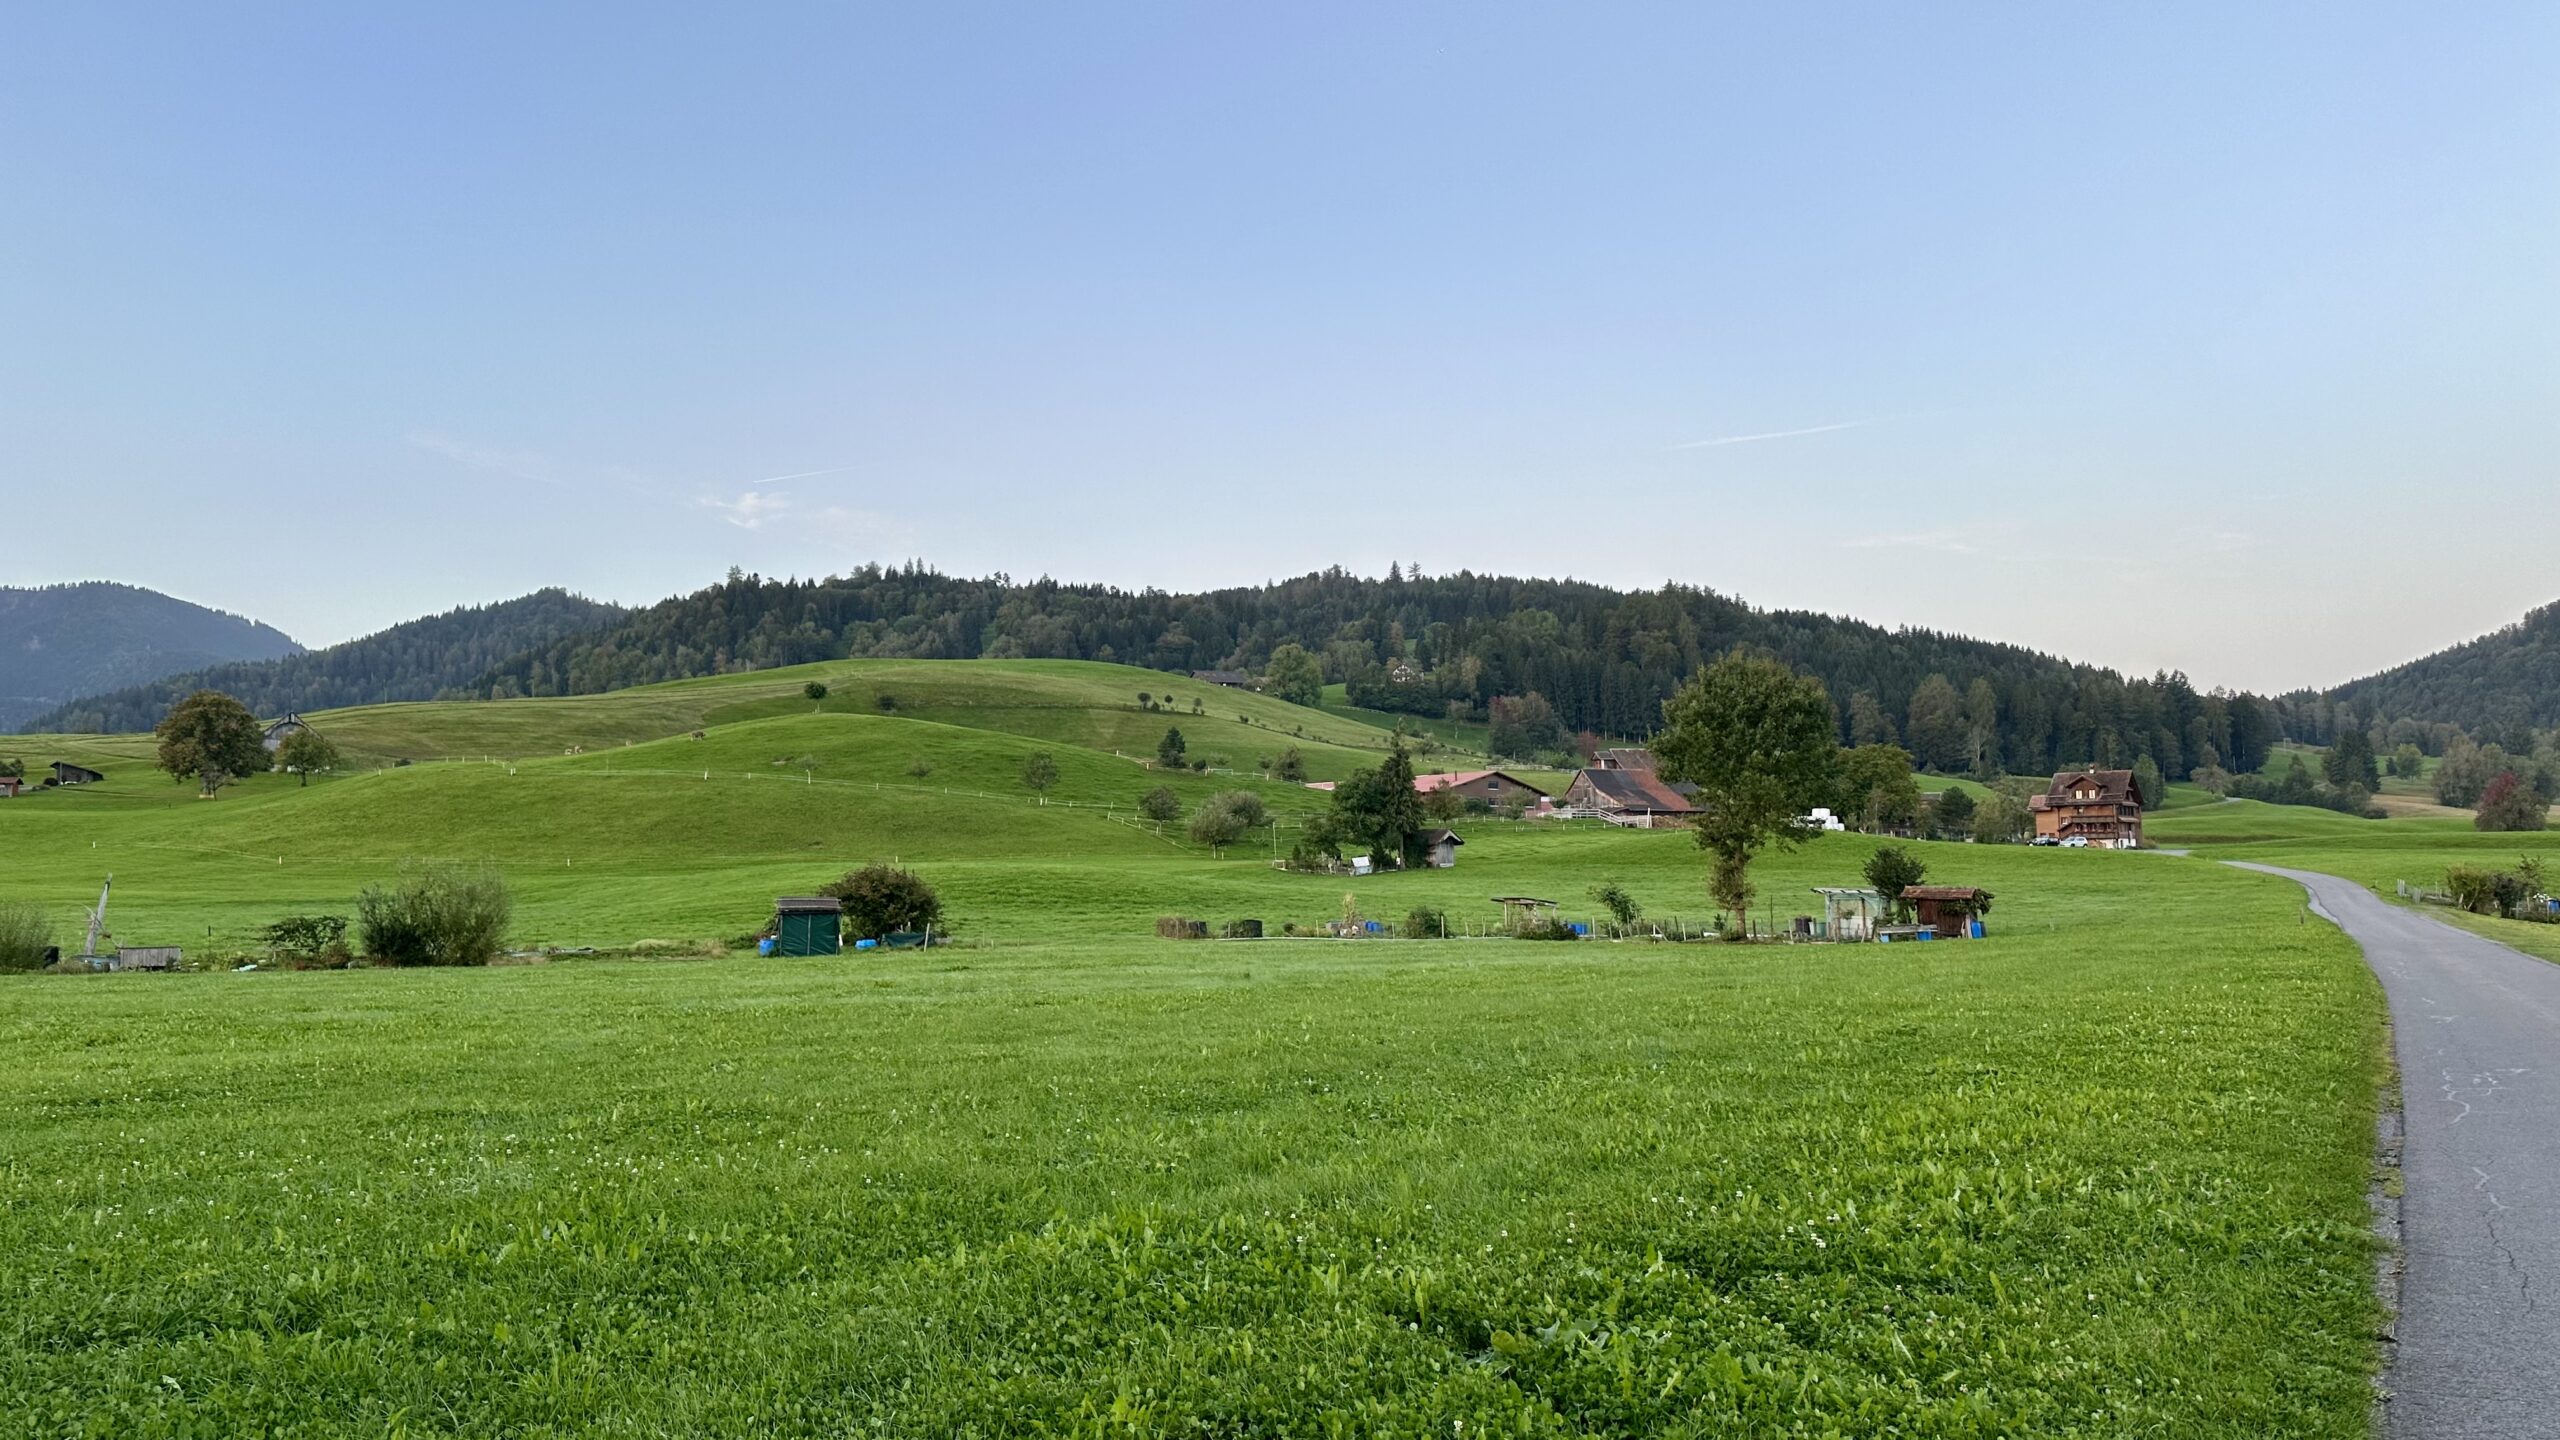 Hilly green pastures with various farm buildings scattered about and higher wooded hills in the background all under a blue sky.